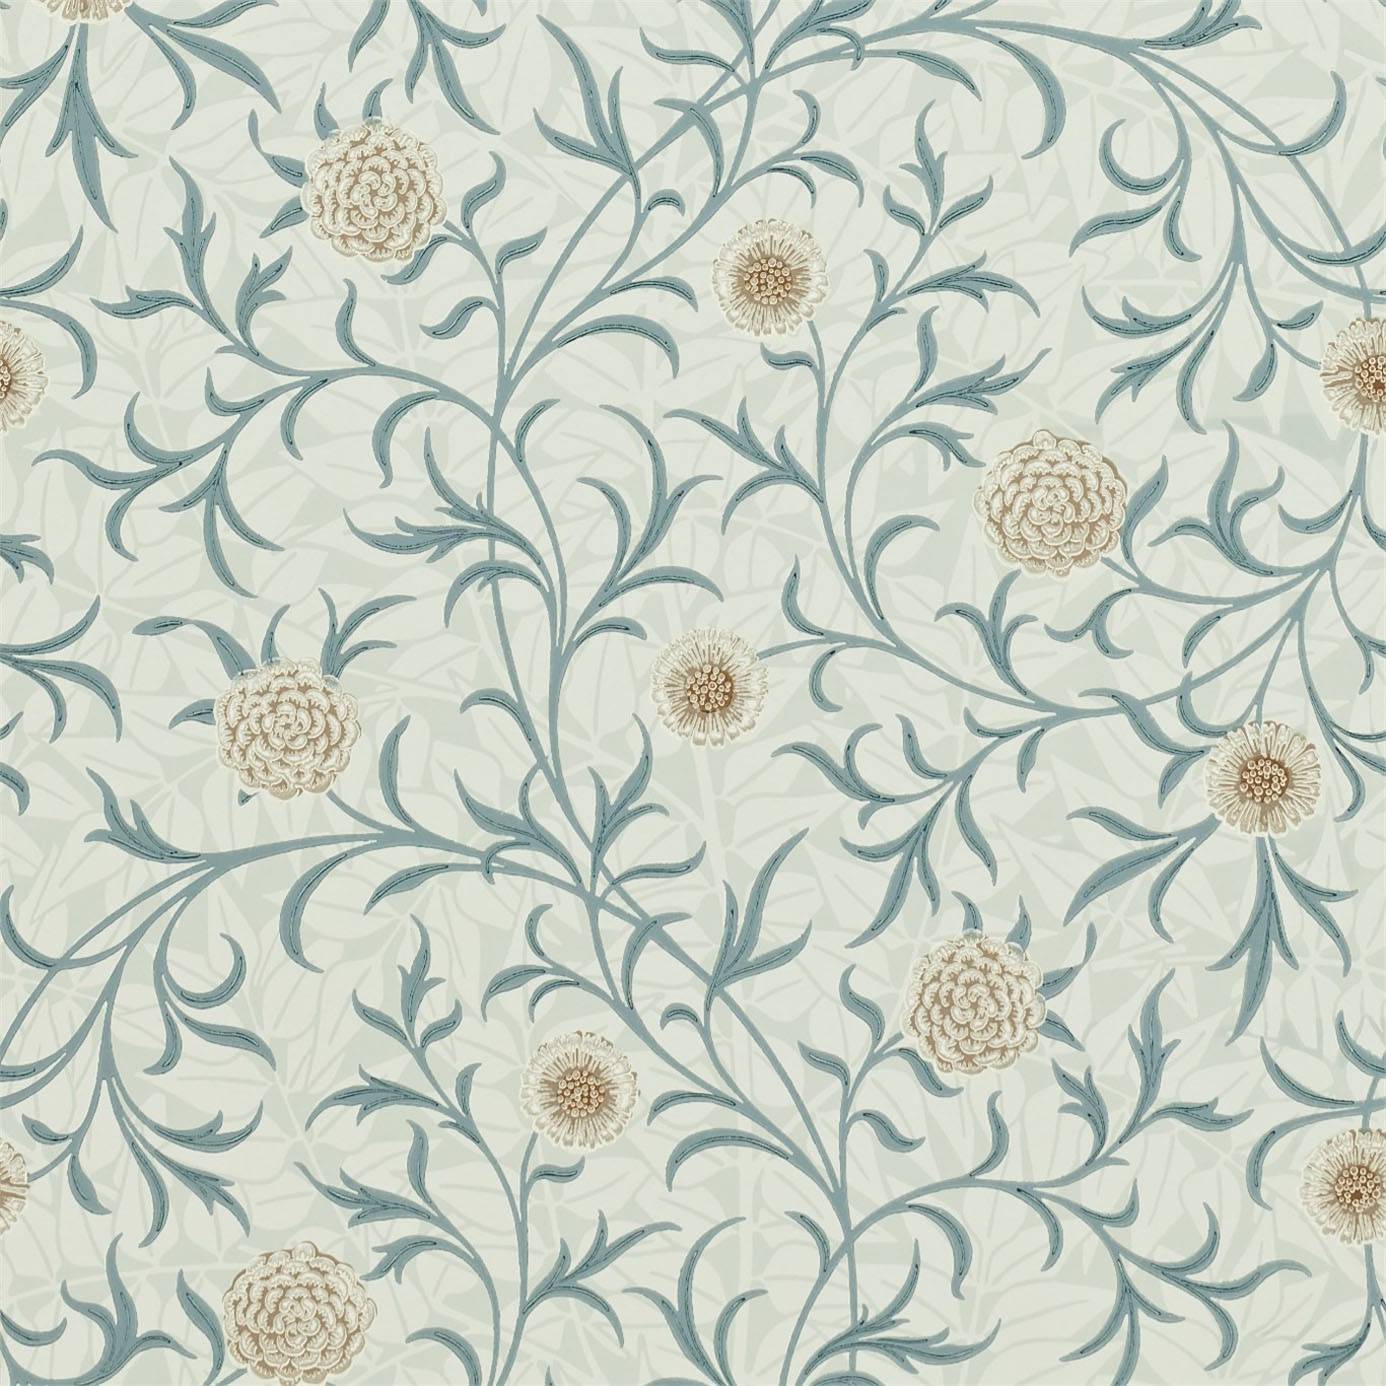 Free download Wallpapers William Morris Co Archive Wallpapers Scroll